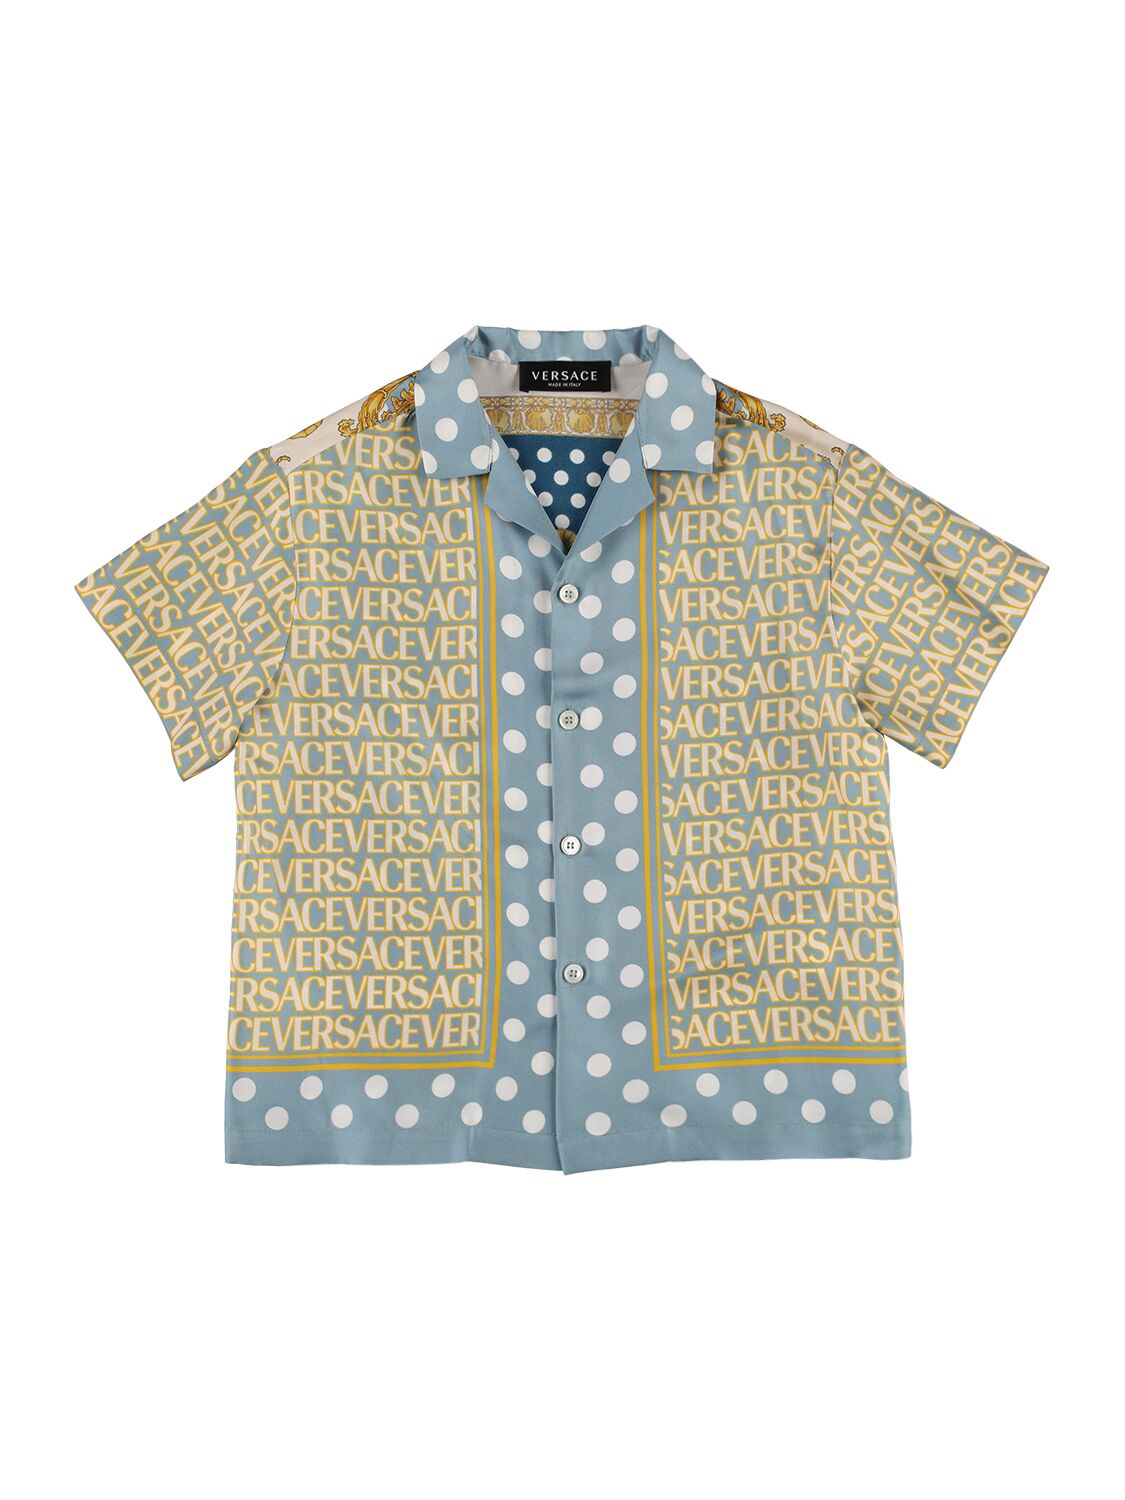 Versace Kids' Printed Silk Twill Shirt In Multicolor